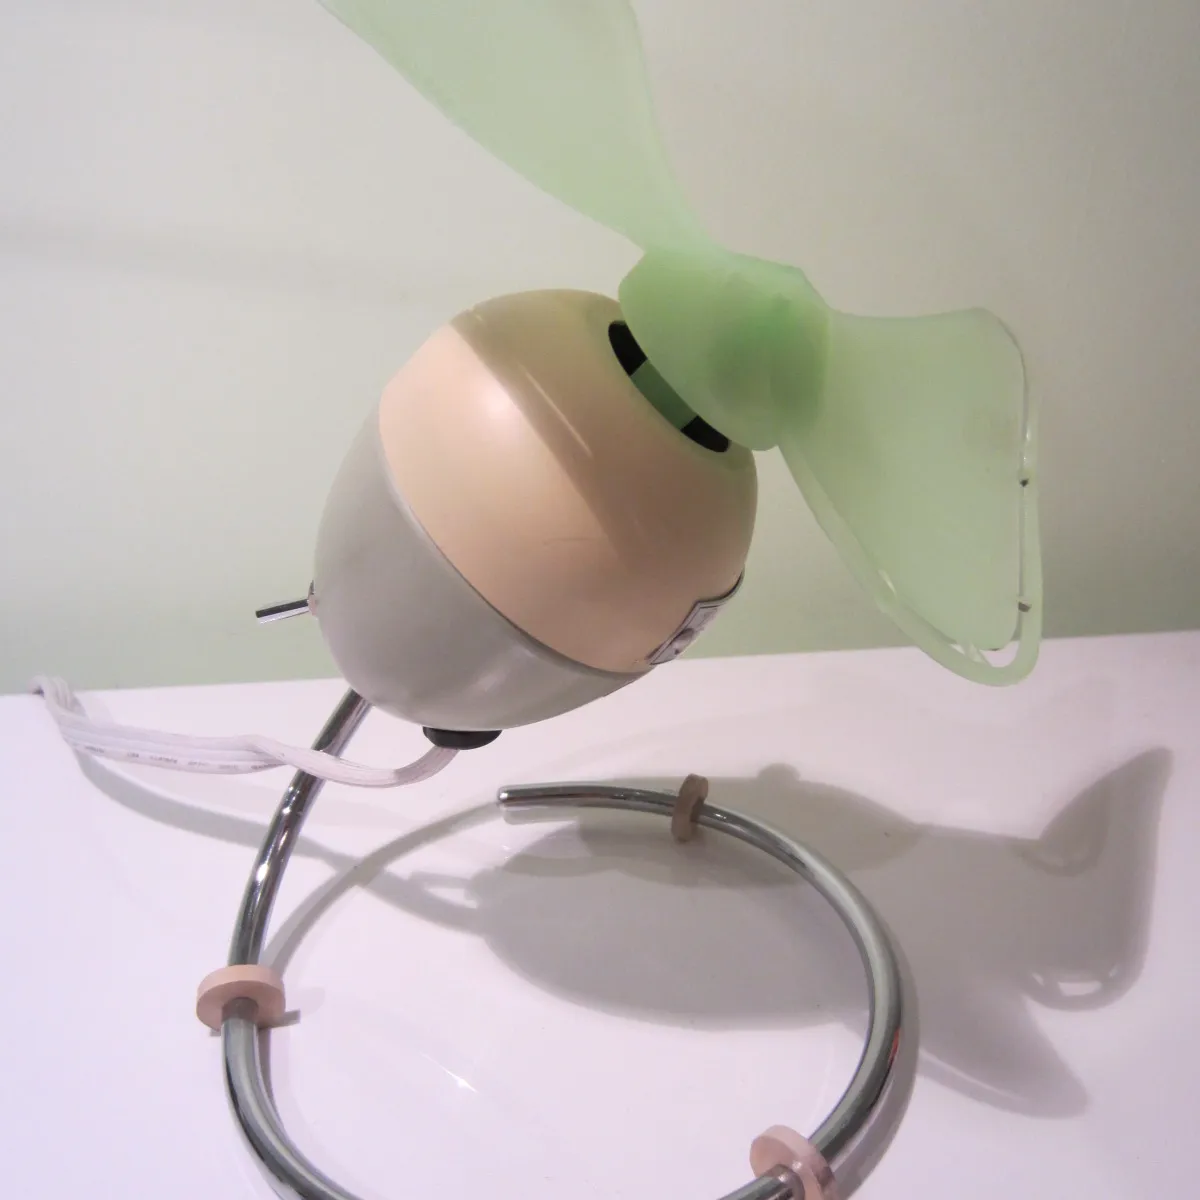 DragonFLY Fan - Made in Canada photo 4